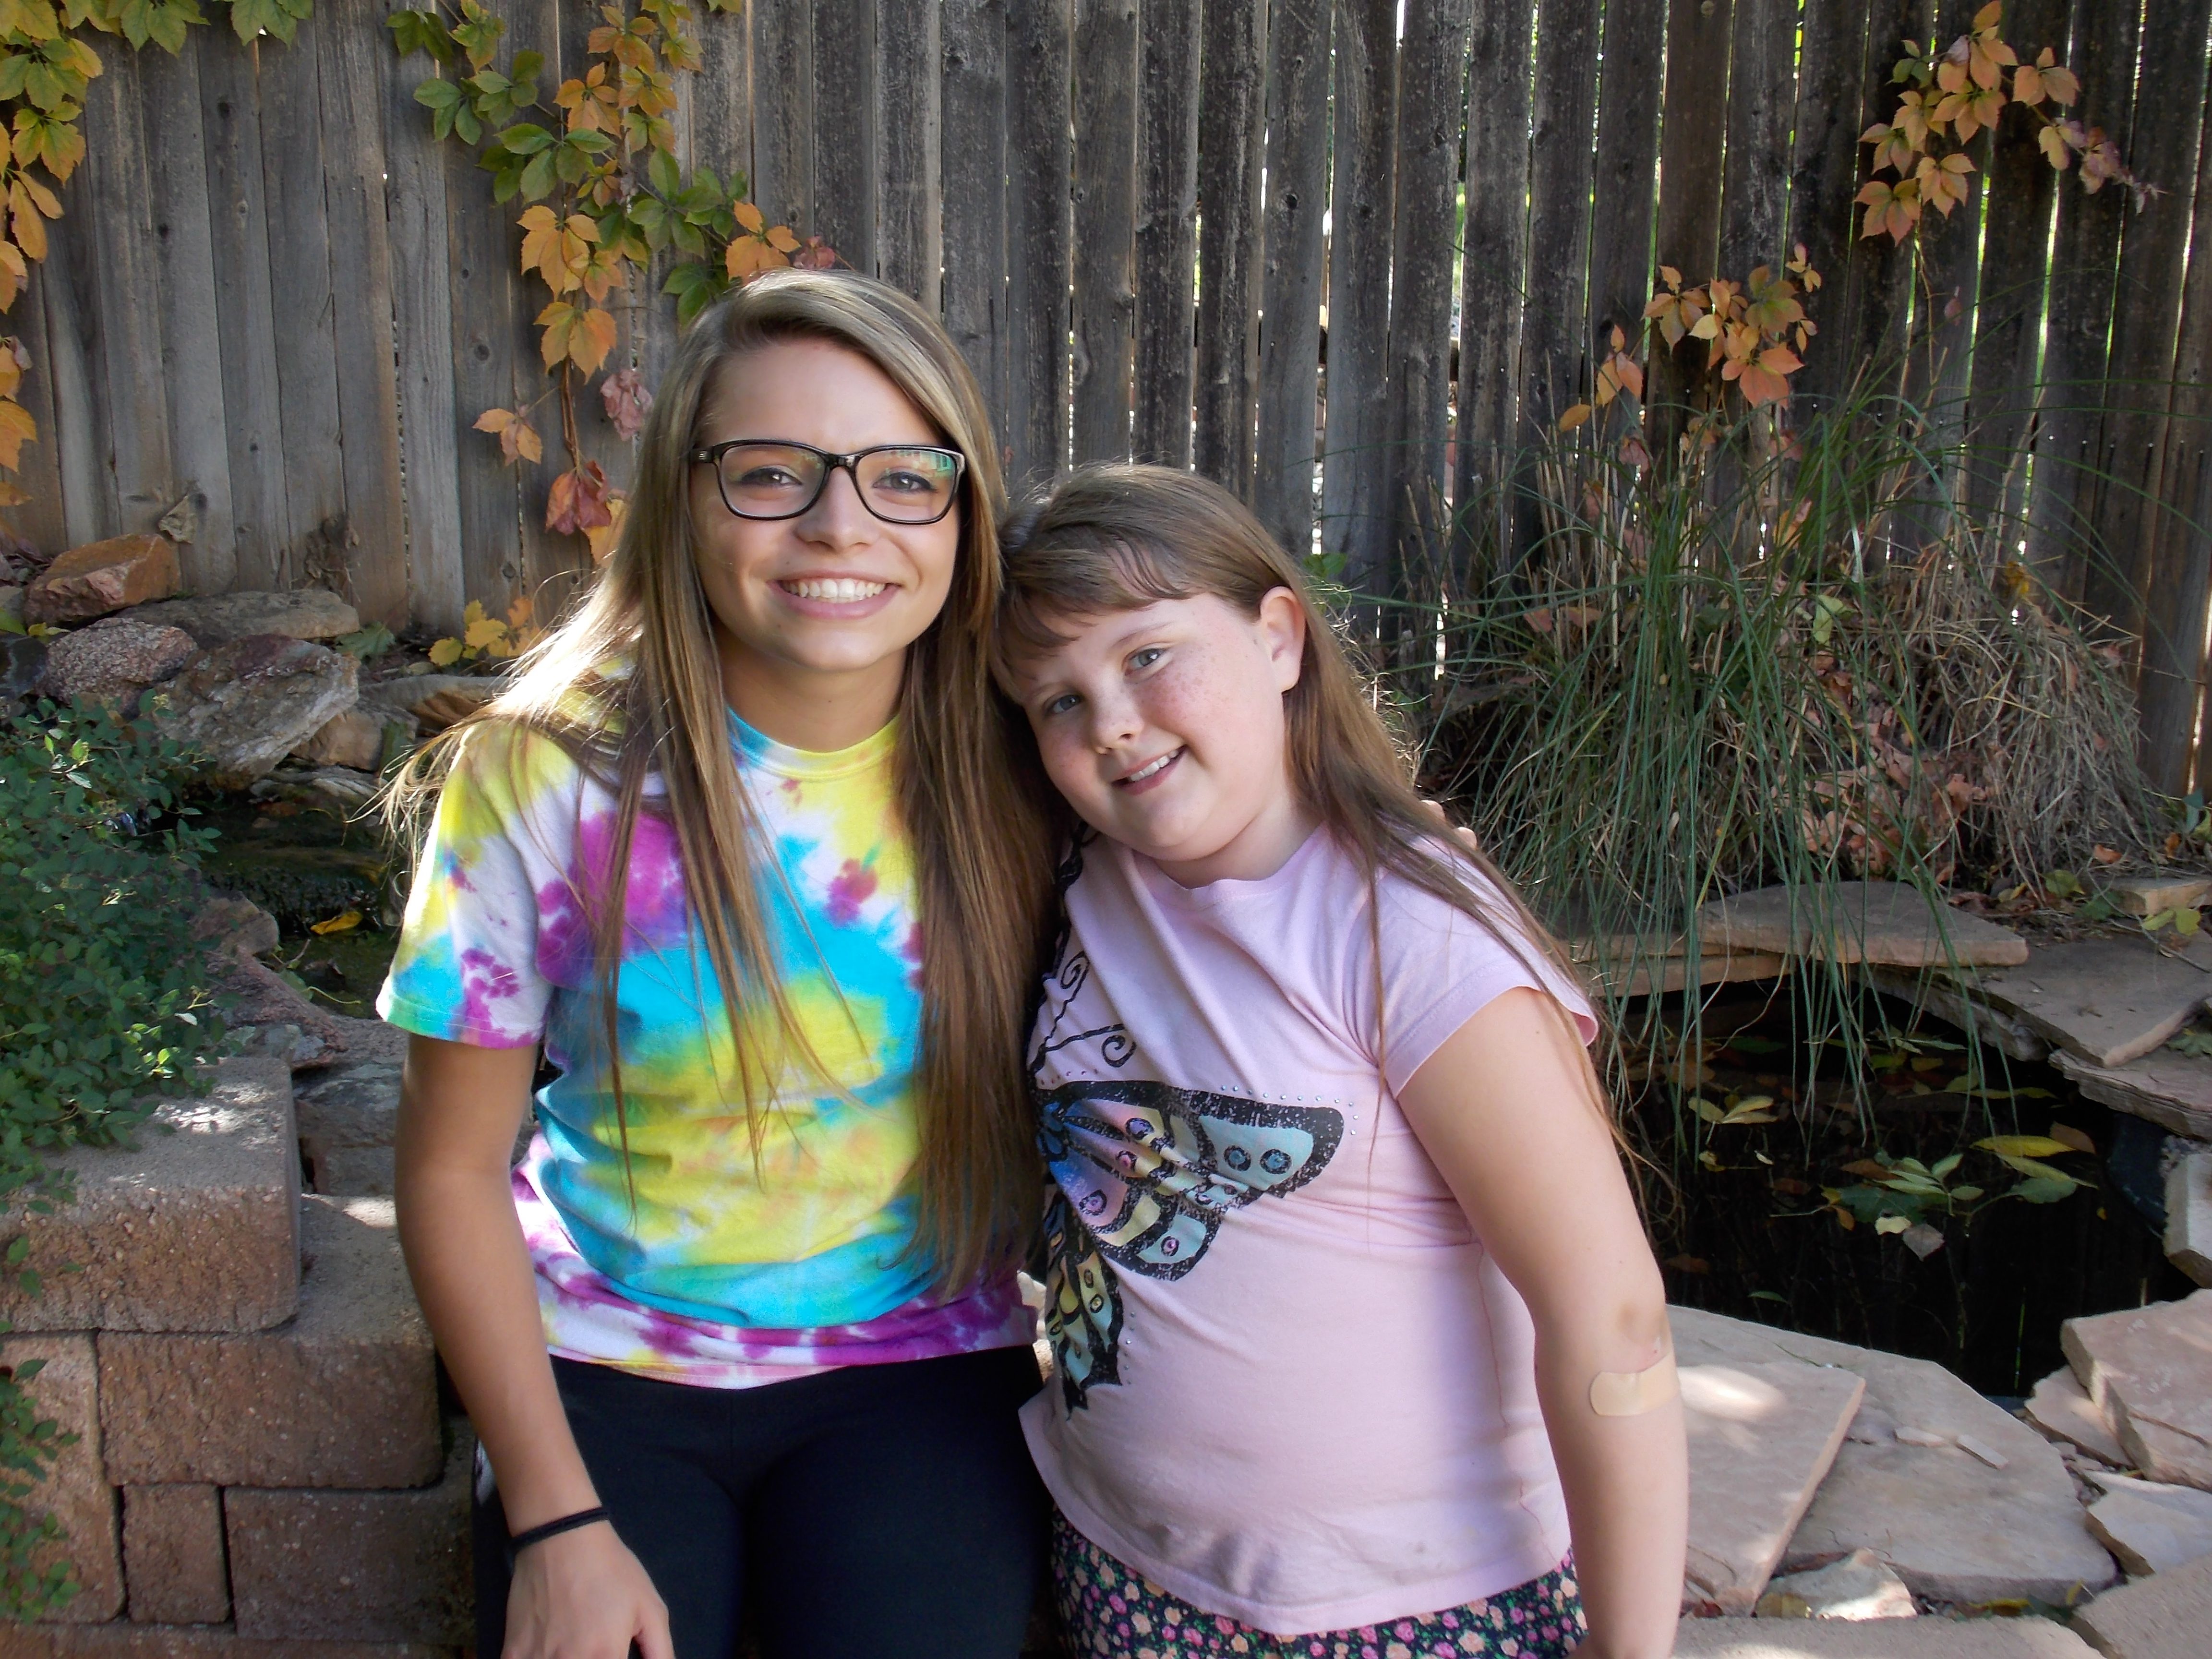 Morgan and her friend Hailee Tawzer 10/2014